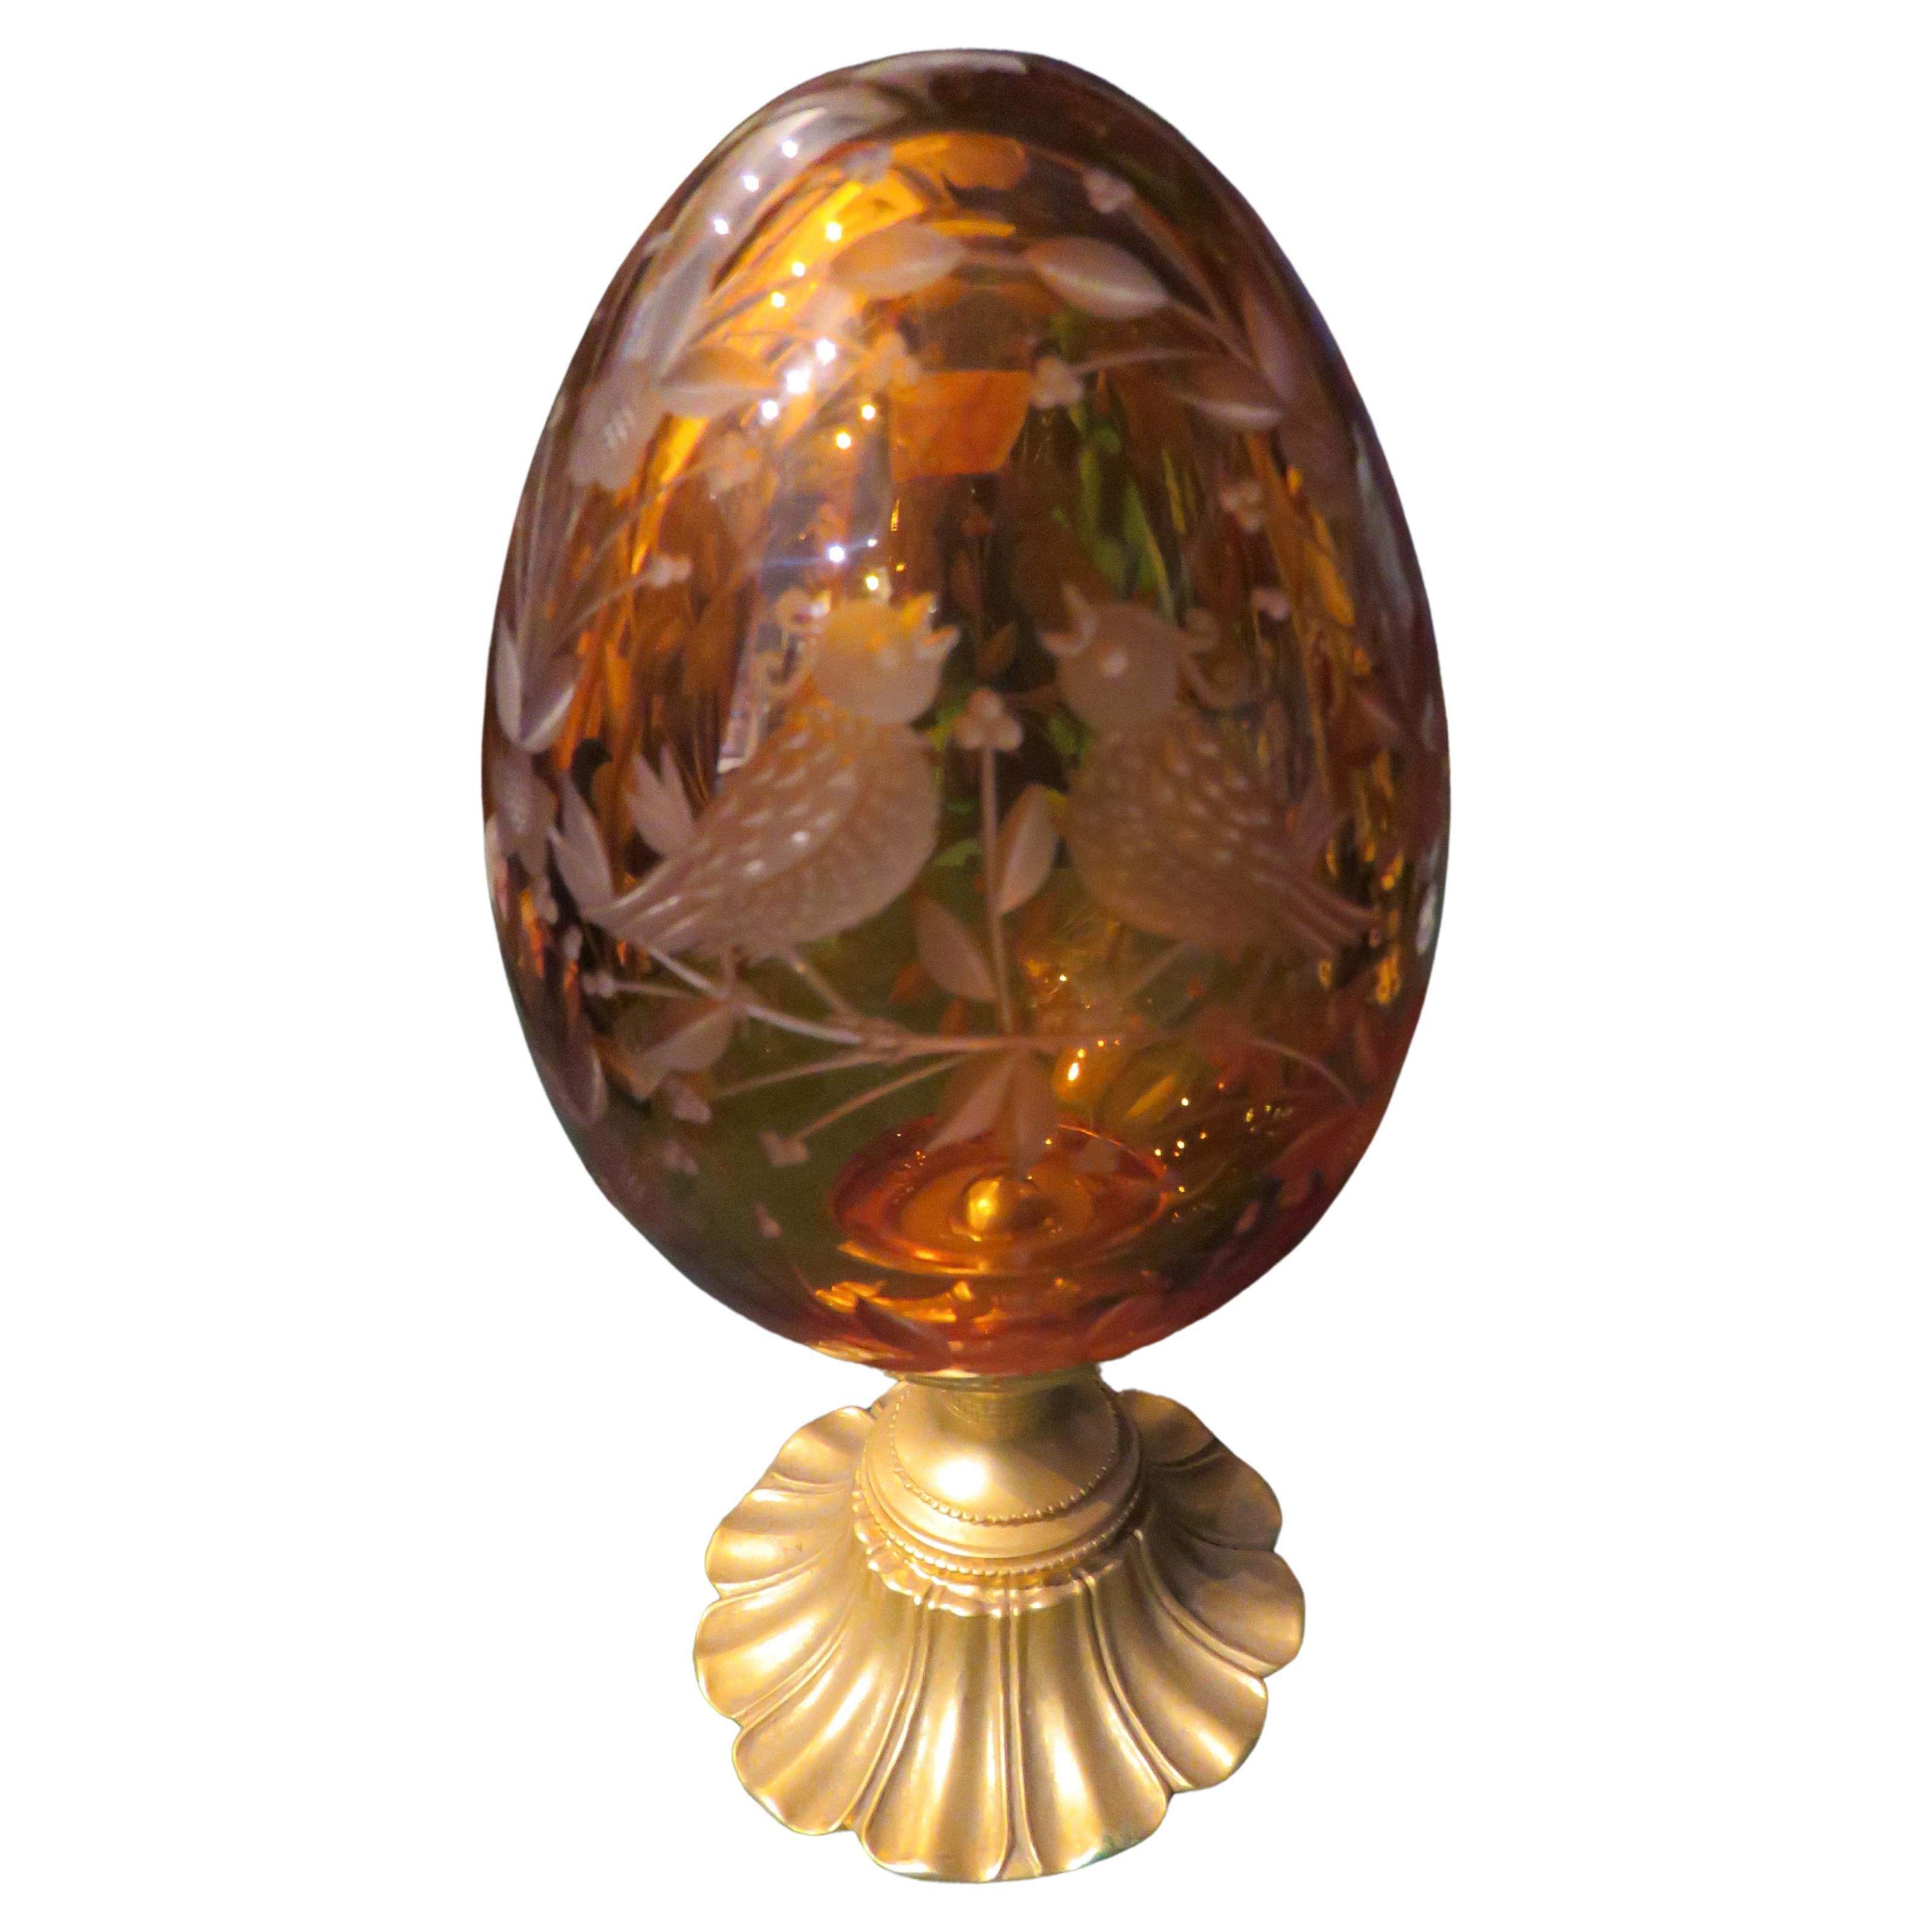  Rare Gorgeous Fancy Hand Cut Faberge Style Crystal 24KT Gold Leaf Egg